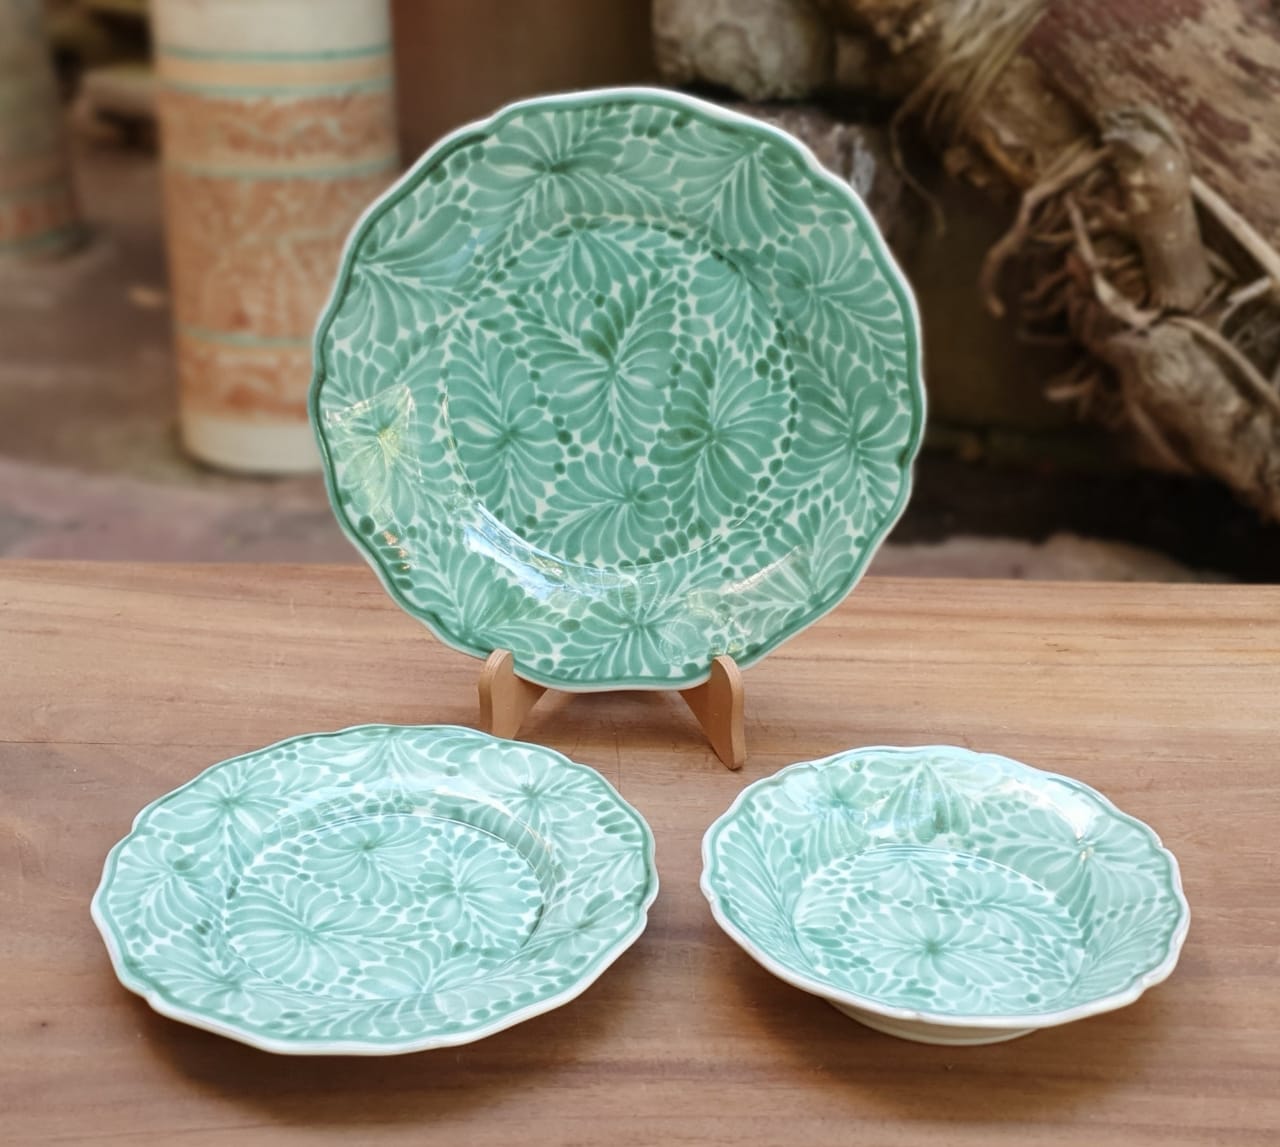 Flower Shape Dish Set (3 Pieces) Milestones Pattern Green and White (One Service)